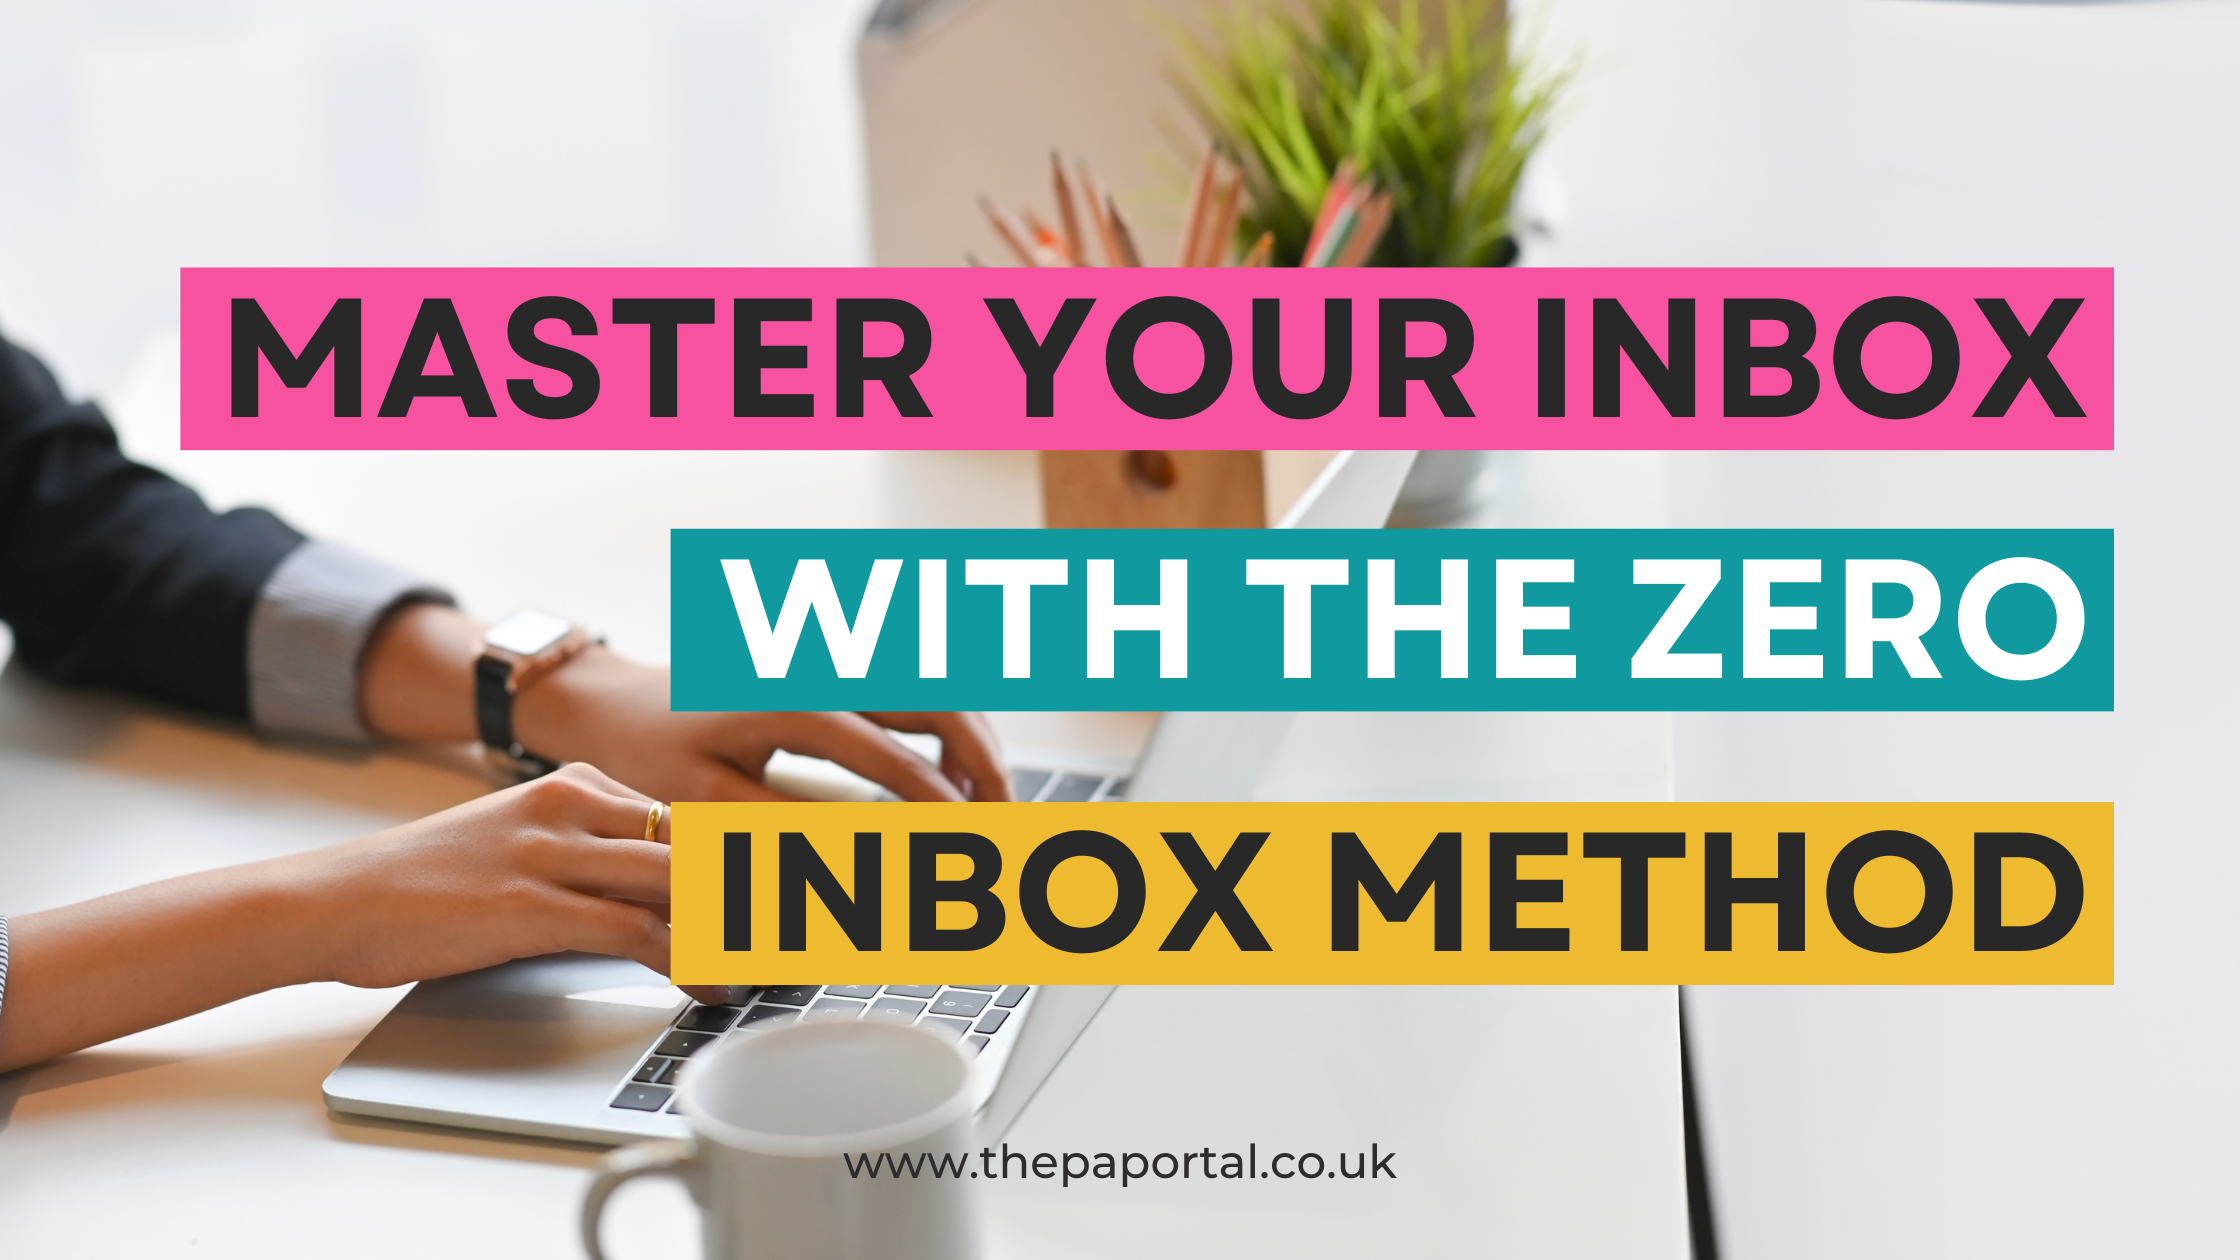 A woman typing on a laptop with text overlaid saying Master Your Inbox with the Zero Inbox Method